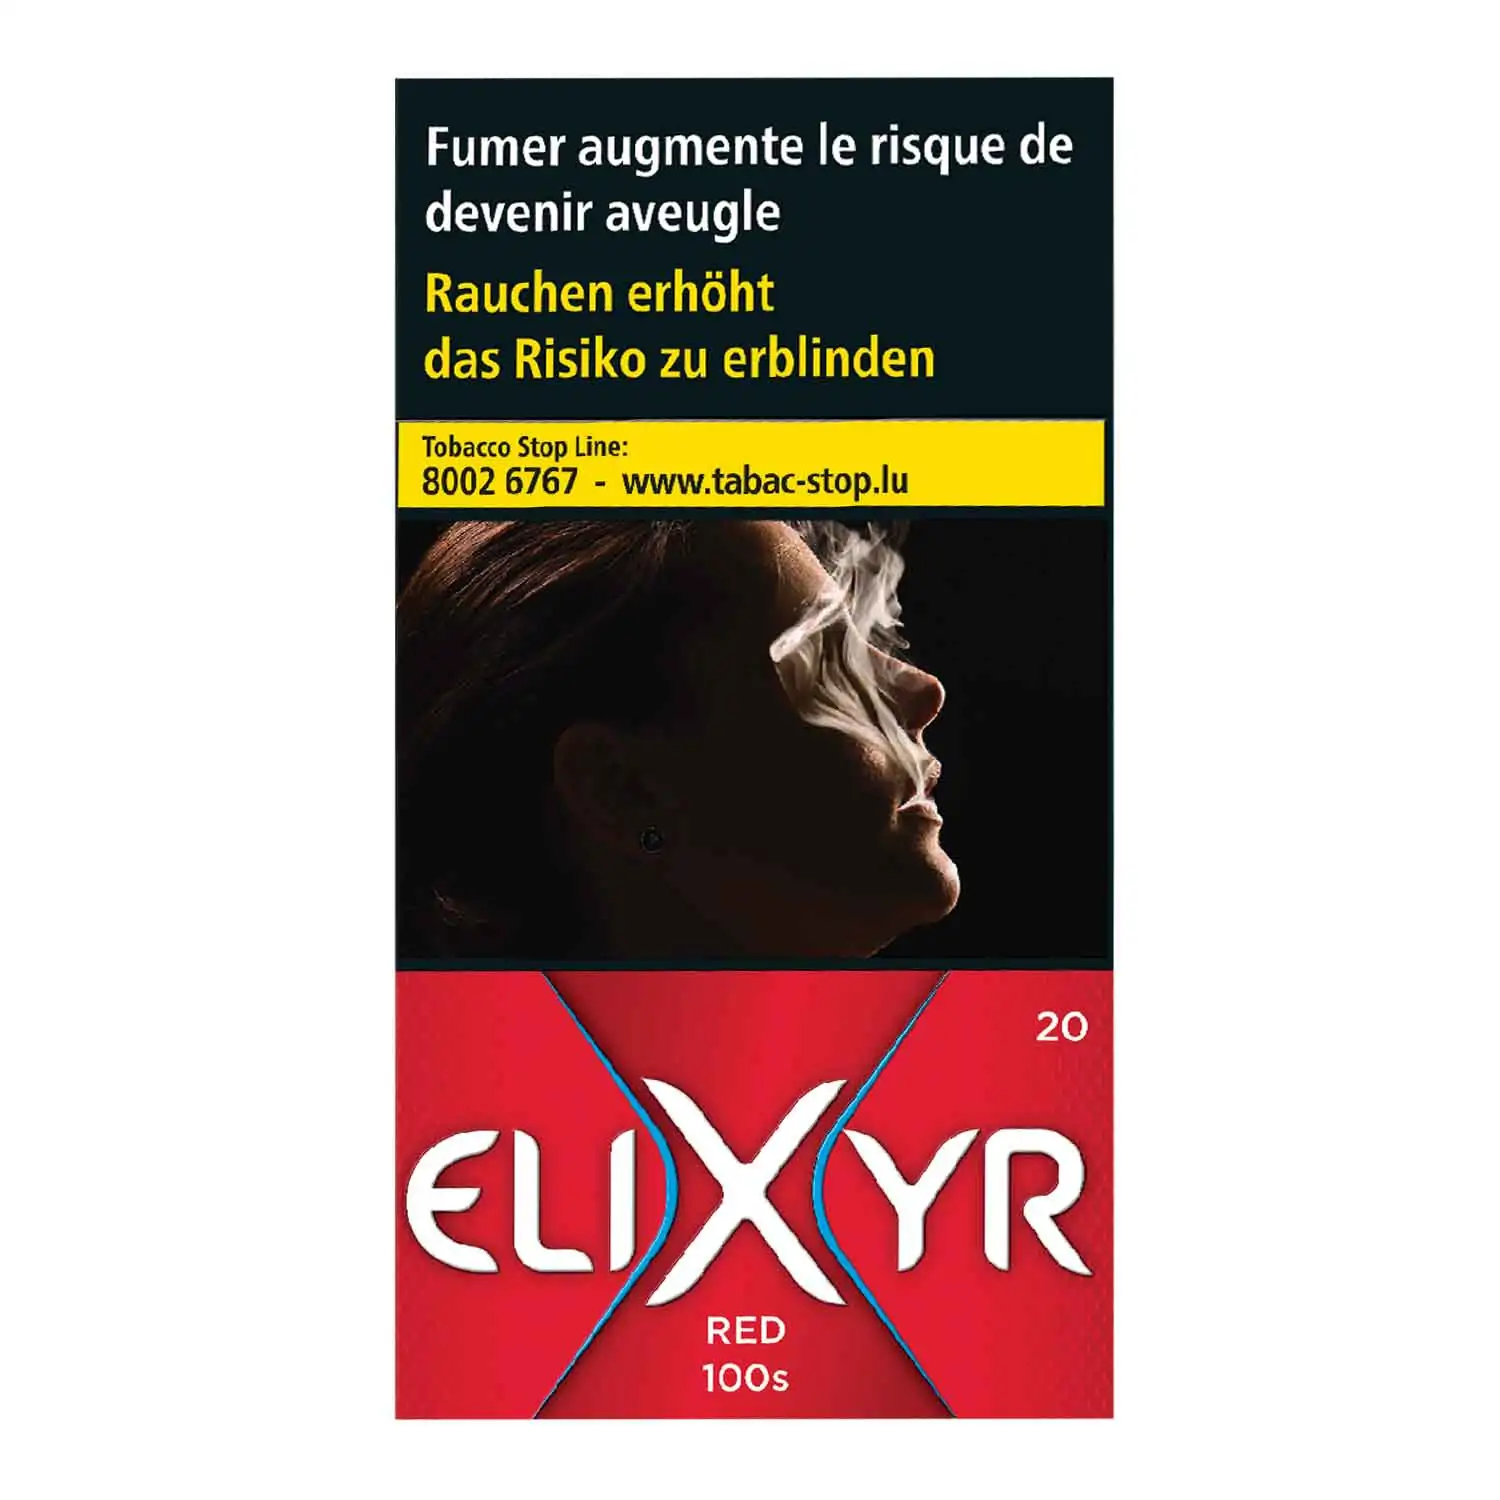 Elixyr red 100's 20 - Buy at Real Tobacco